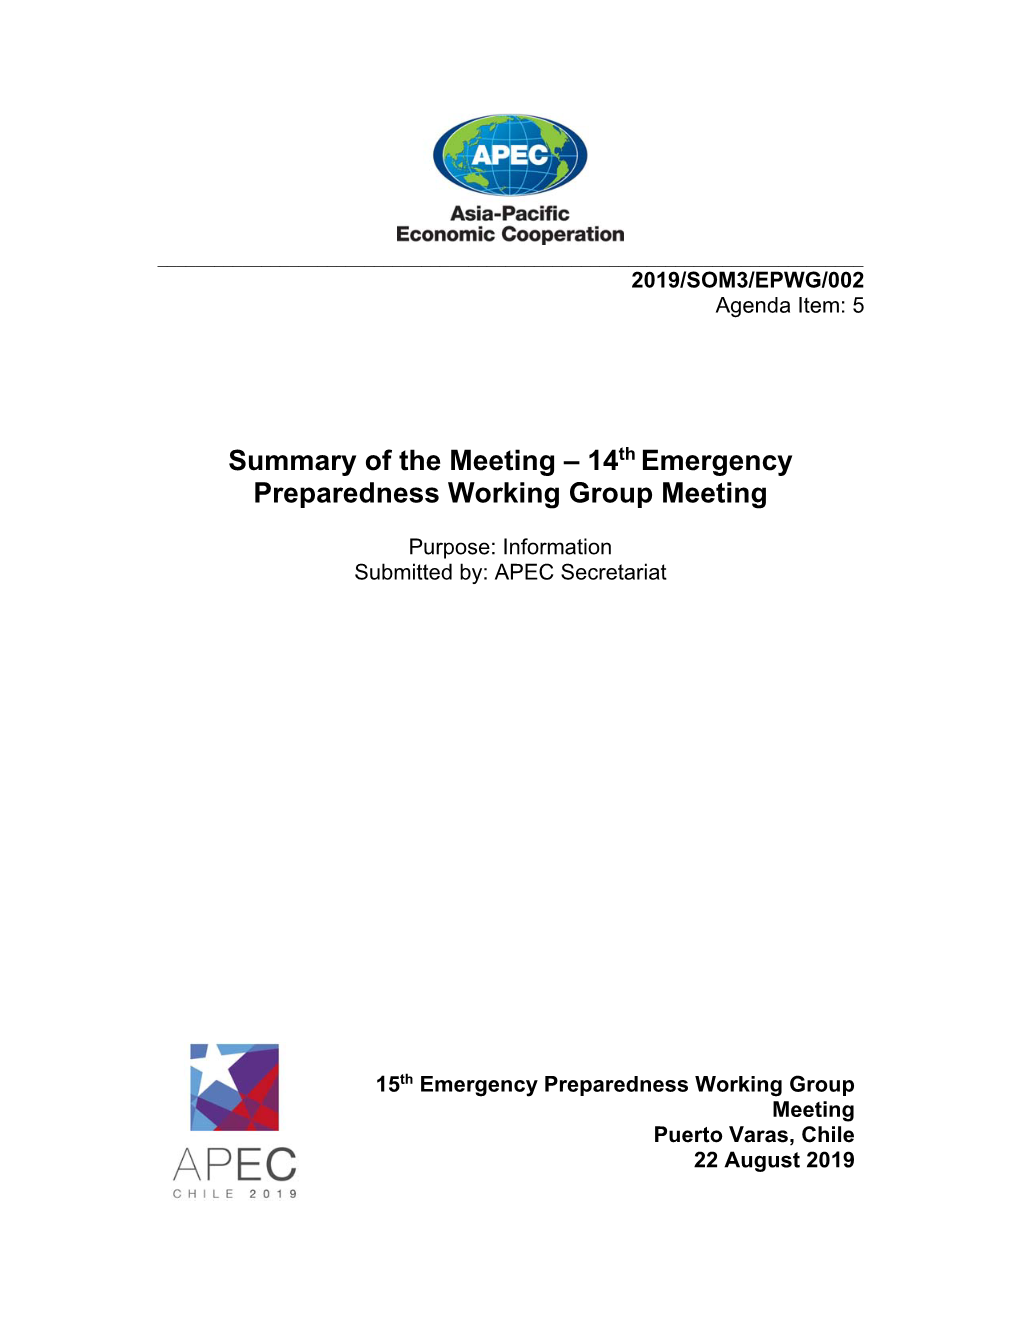 Summary of the Meeting – 14Th Emergency Preparedness Working Group Meeting